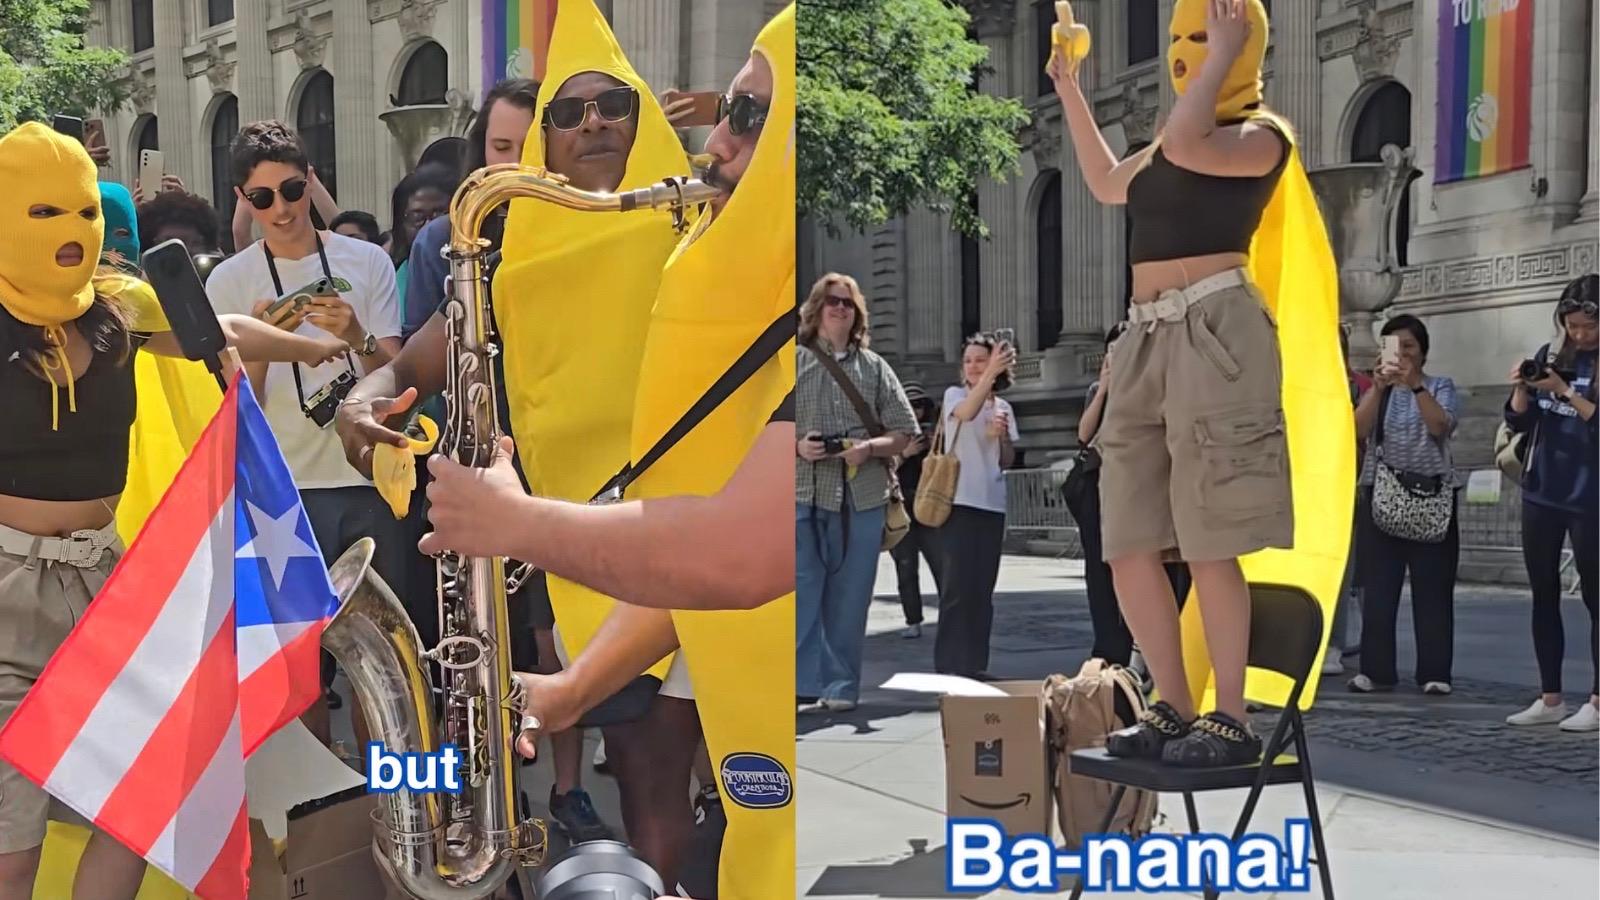 bring your own banana event in nyc